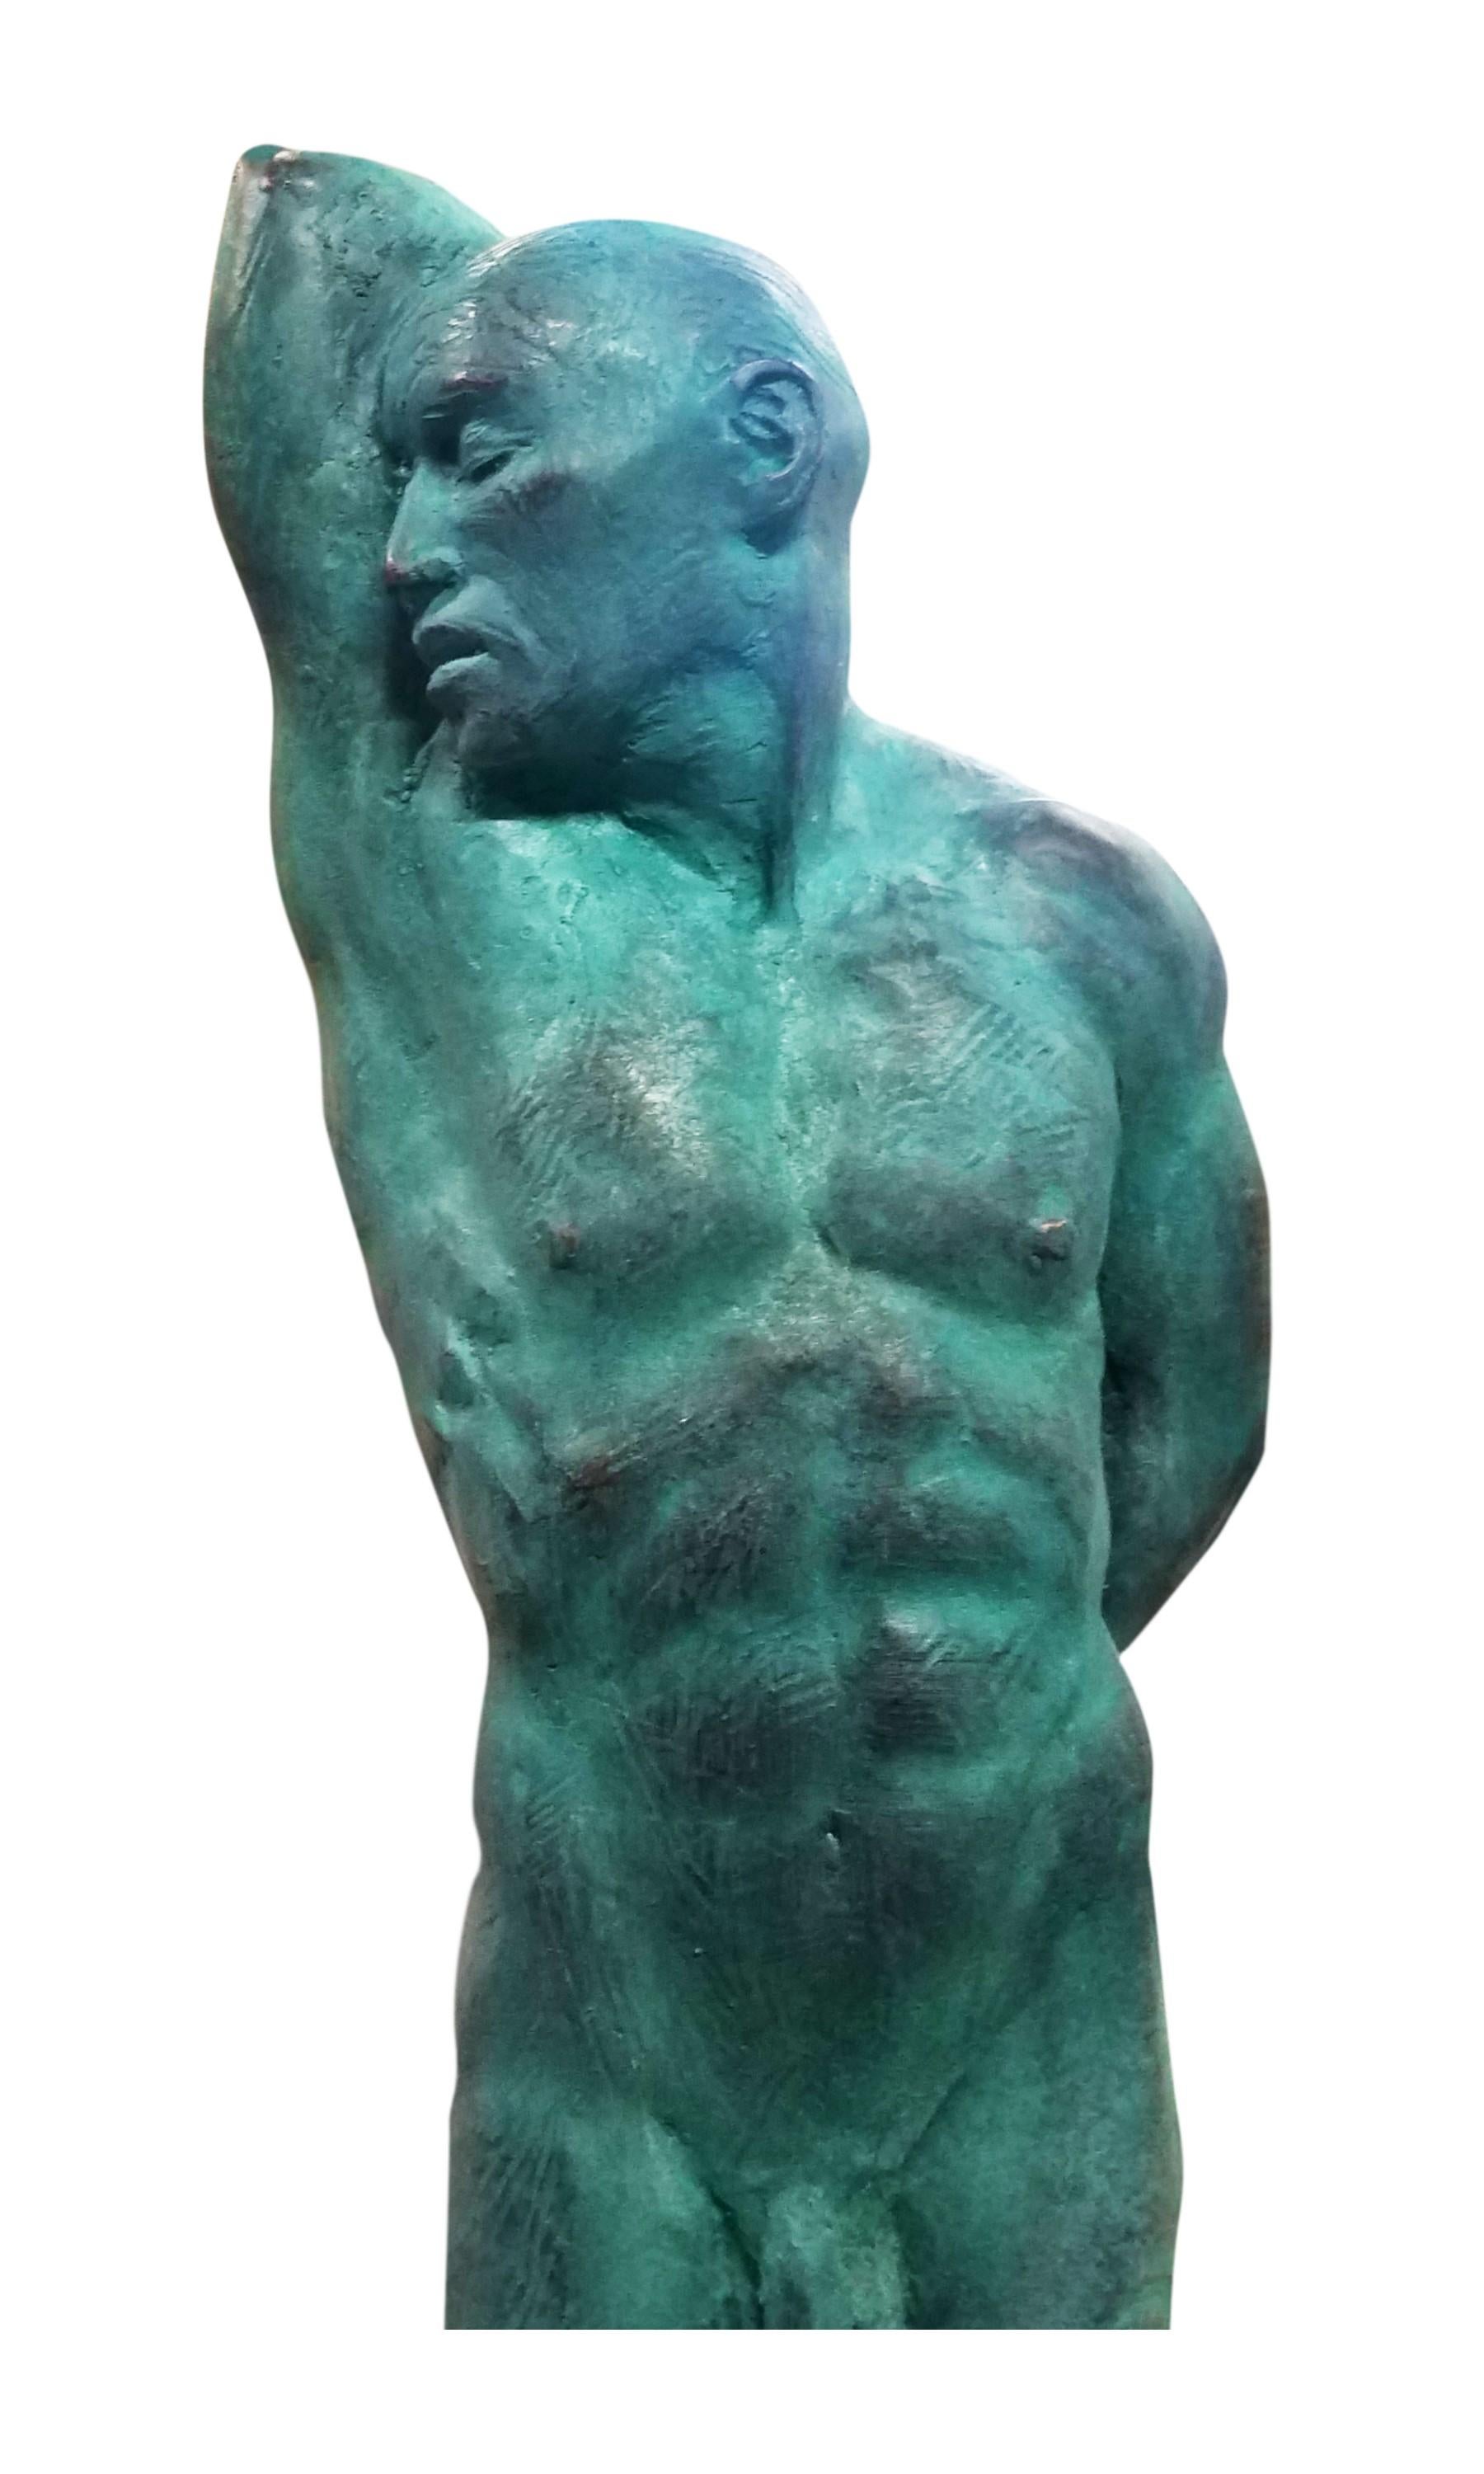 This is an extraordinary bronze sculpture of a Classic male nude by artist Dean Kugler. Attention to detail and complete understanding of the human figure are evident. The figure stands with most of his weight on one foot, contrapposto, and his arm